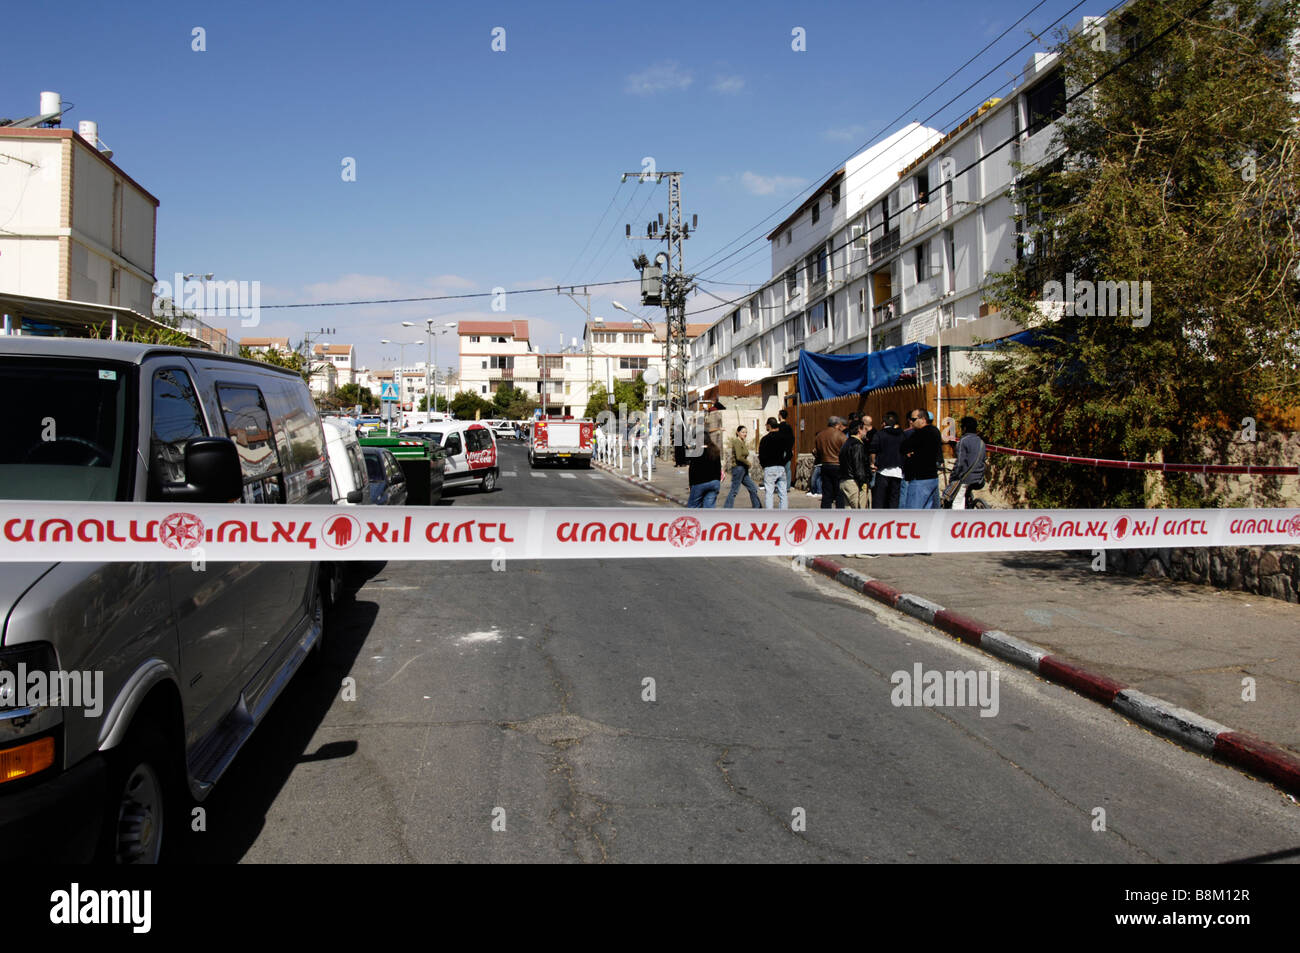 Aftermath of a Terrorist Attack 000 Stock Photo